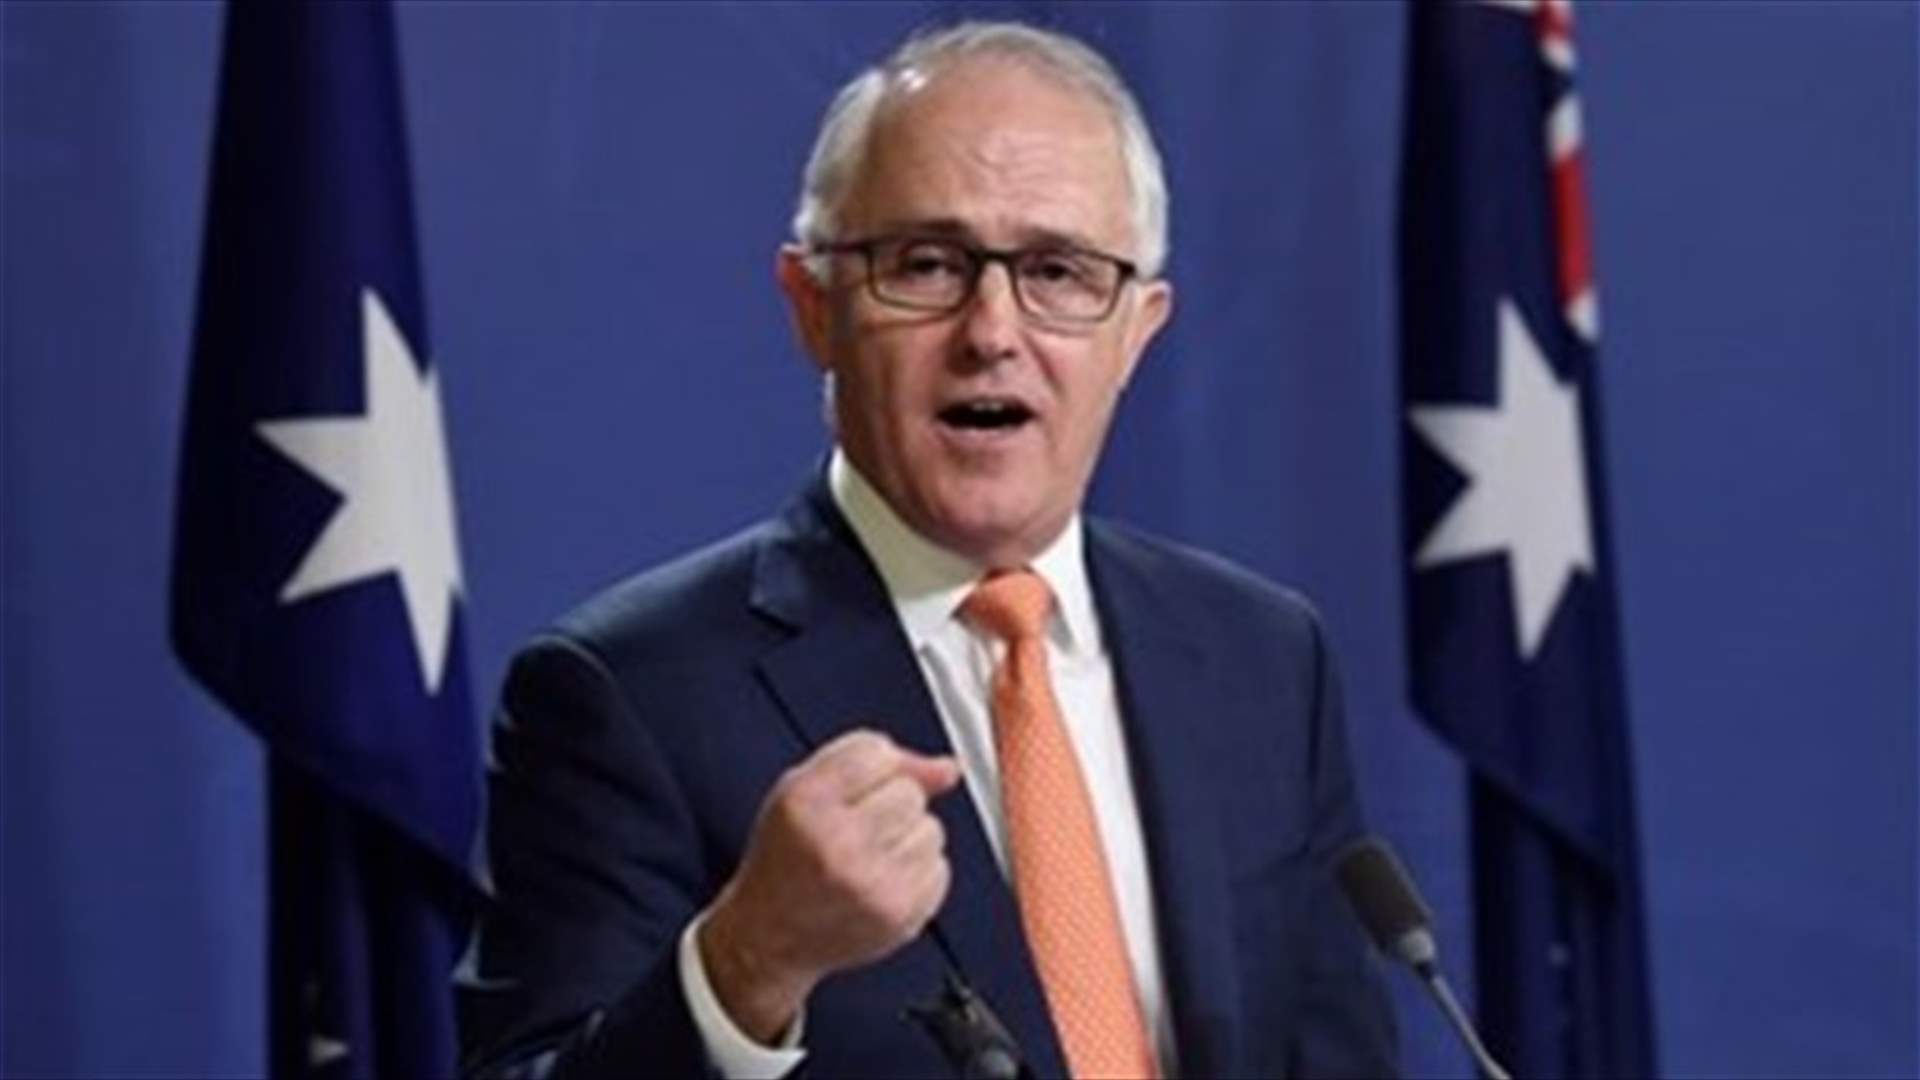 Australia foreshadows expanding role in fight against Islamic State in Syria and Iraq